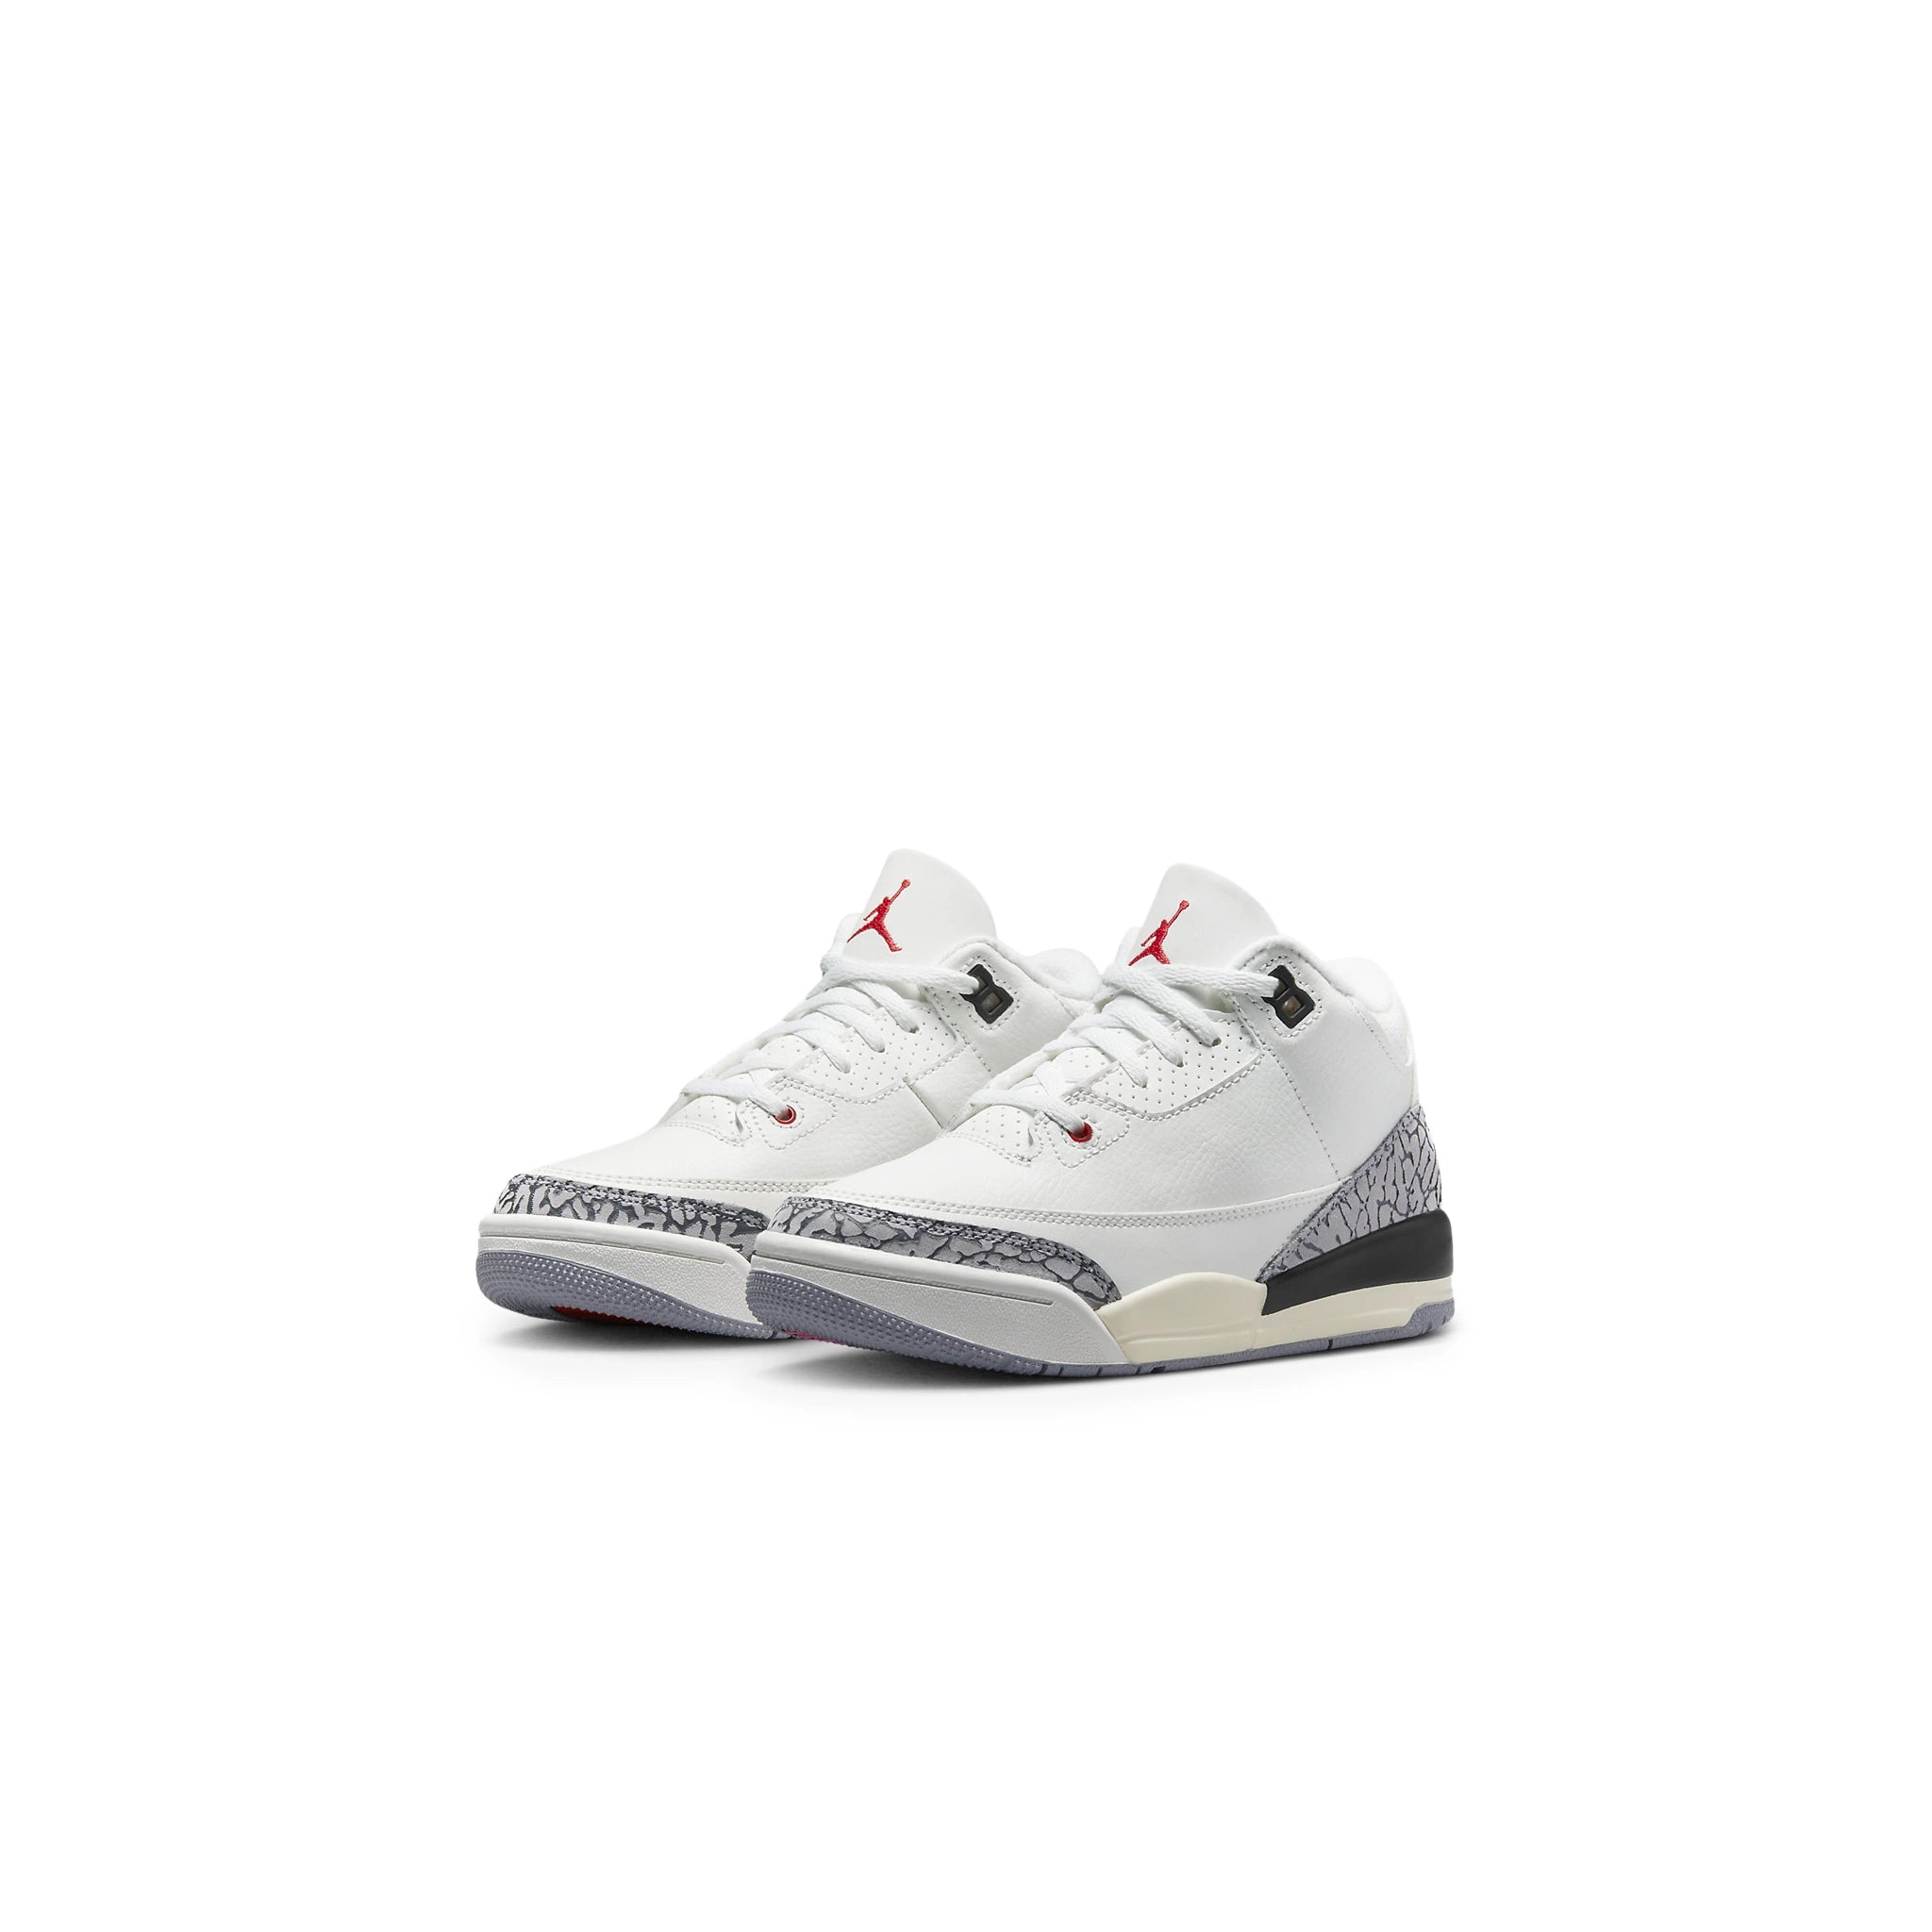 Front view of Air Jordan 3 Retro White Cement Reimagined (PS)